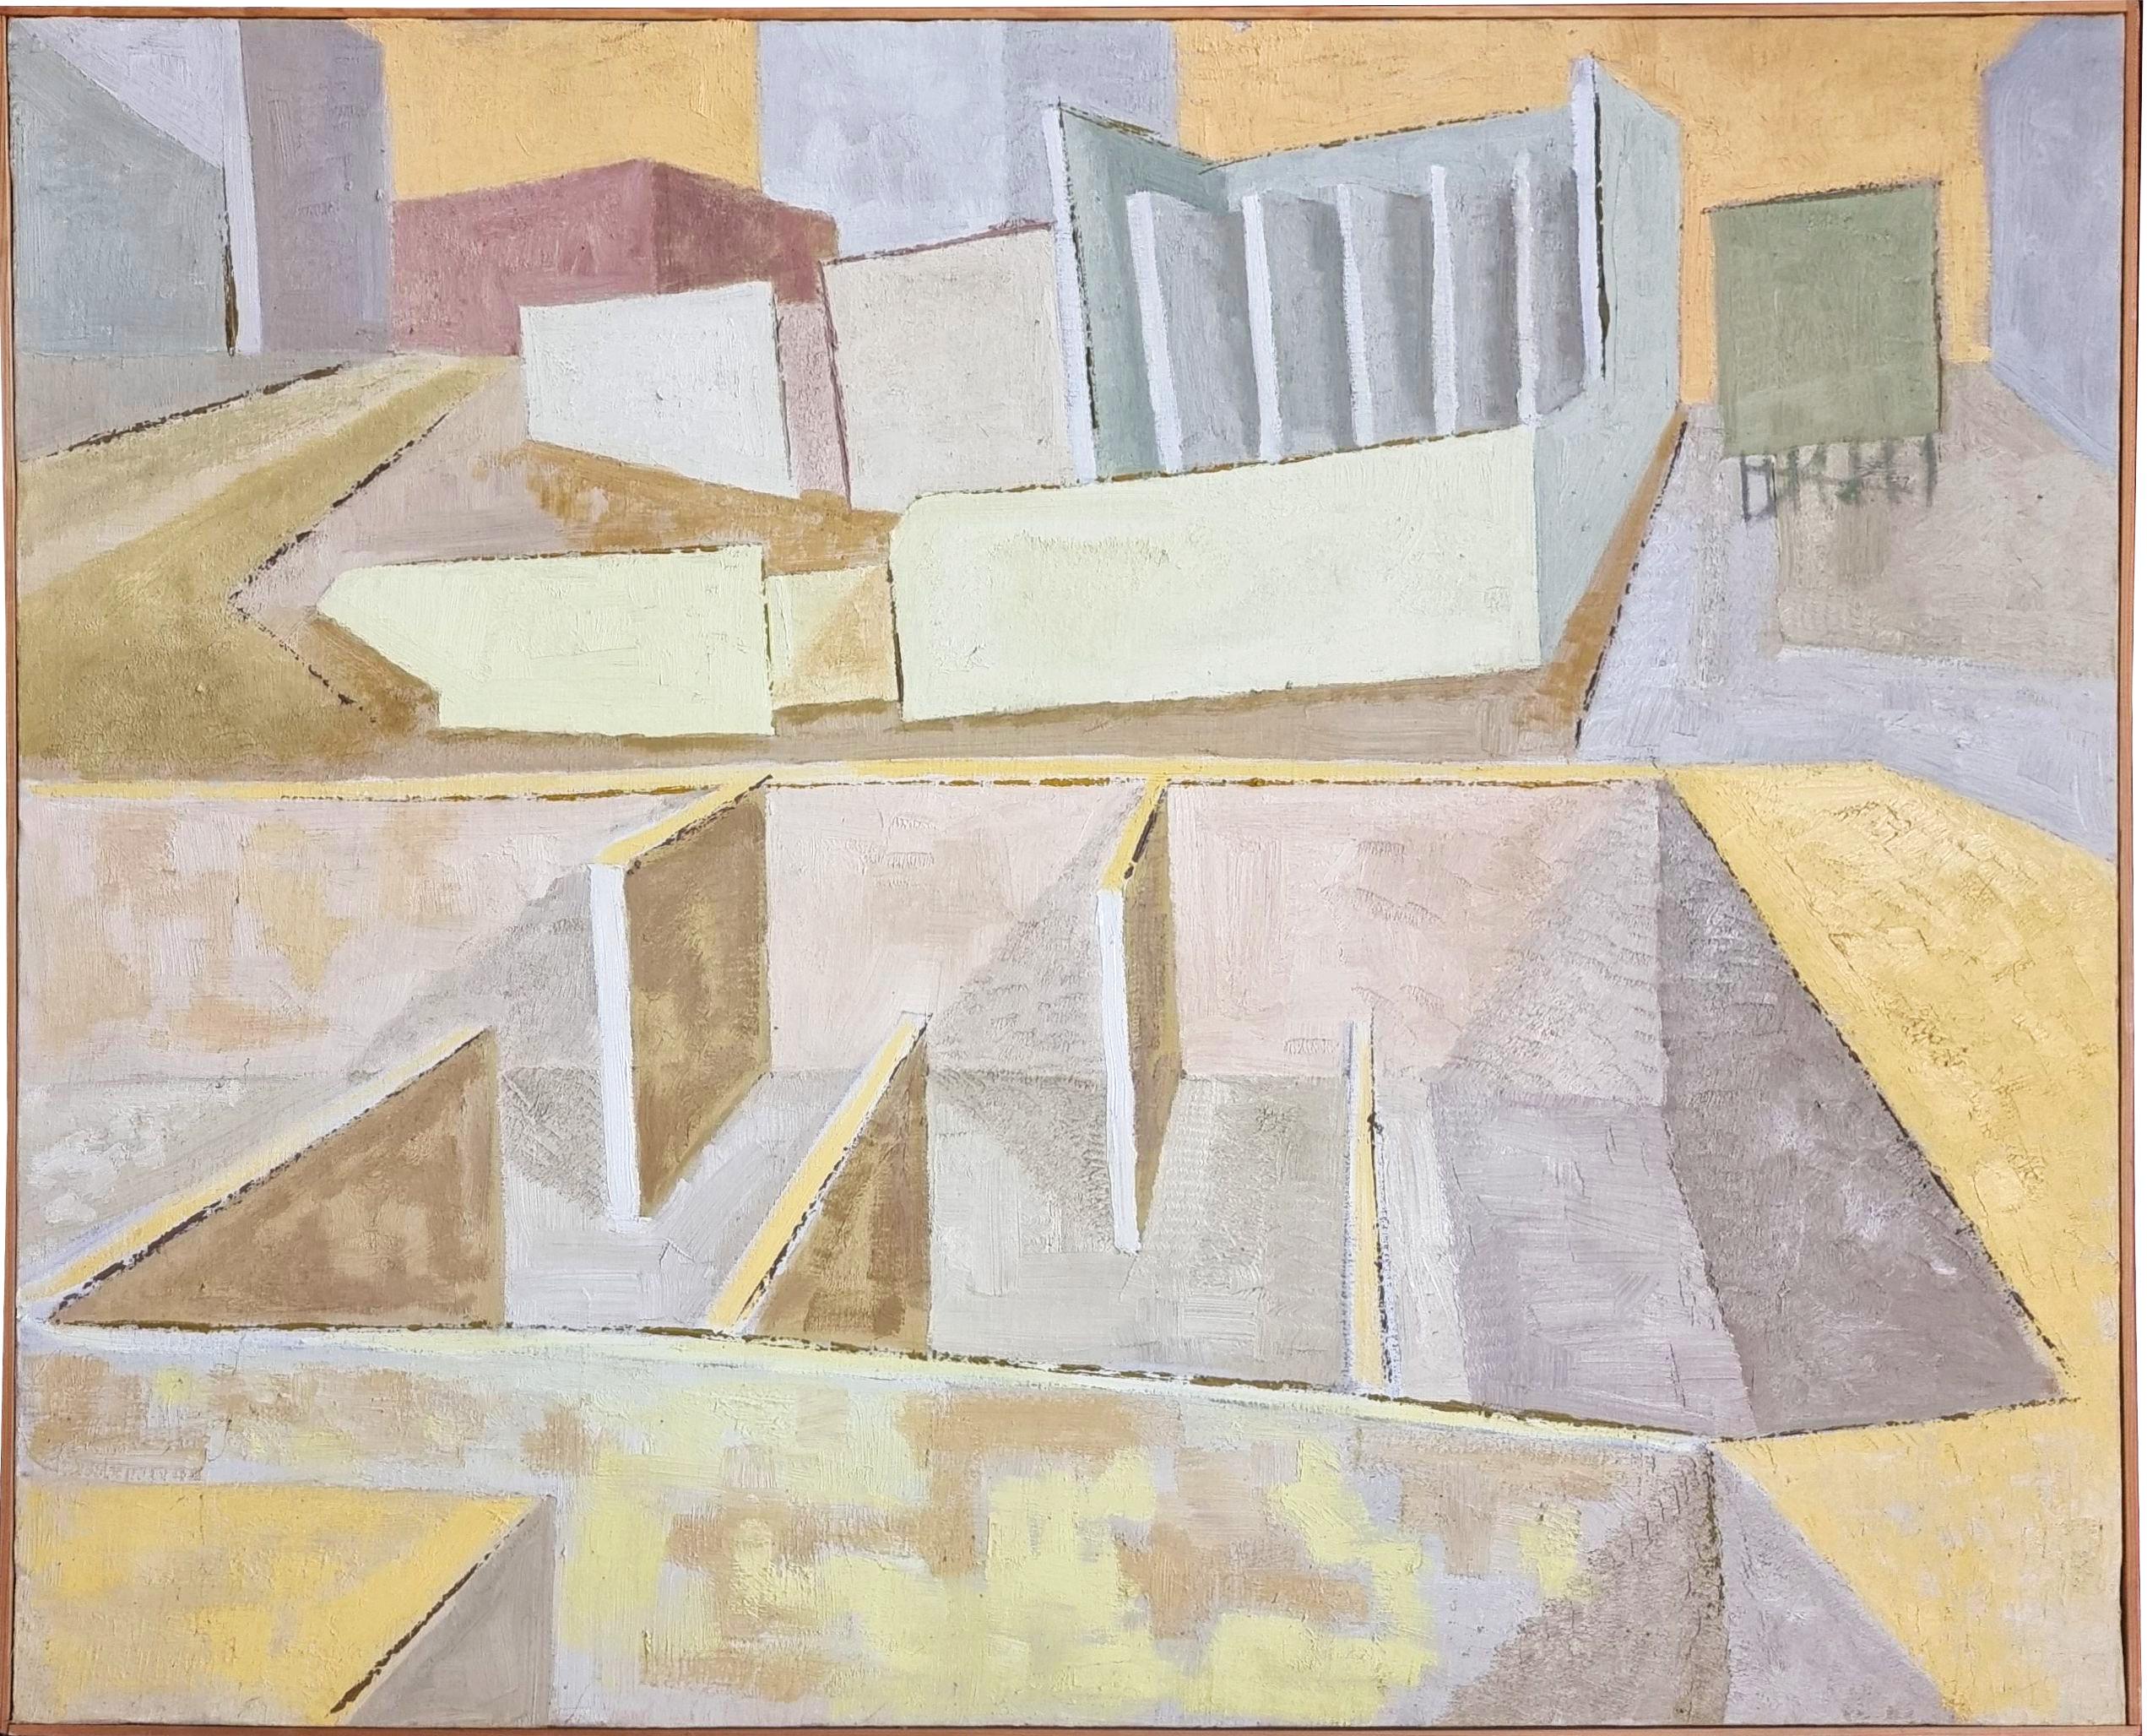 Untitled (Geometric Abstraction, Cityscape, Feyninger) - Painting by Unknown